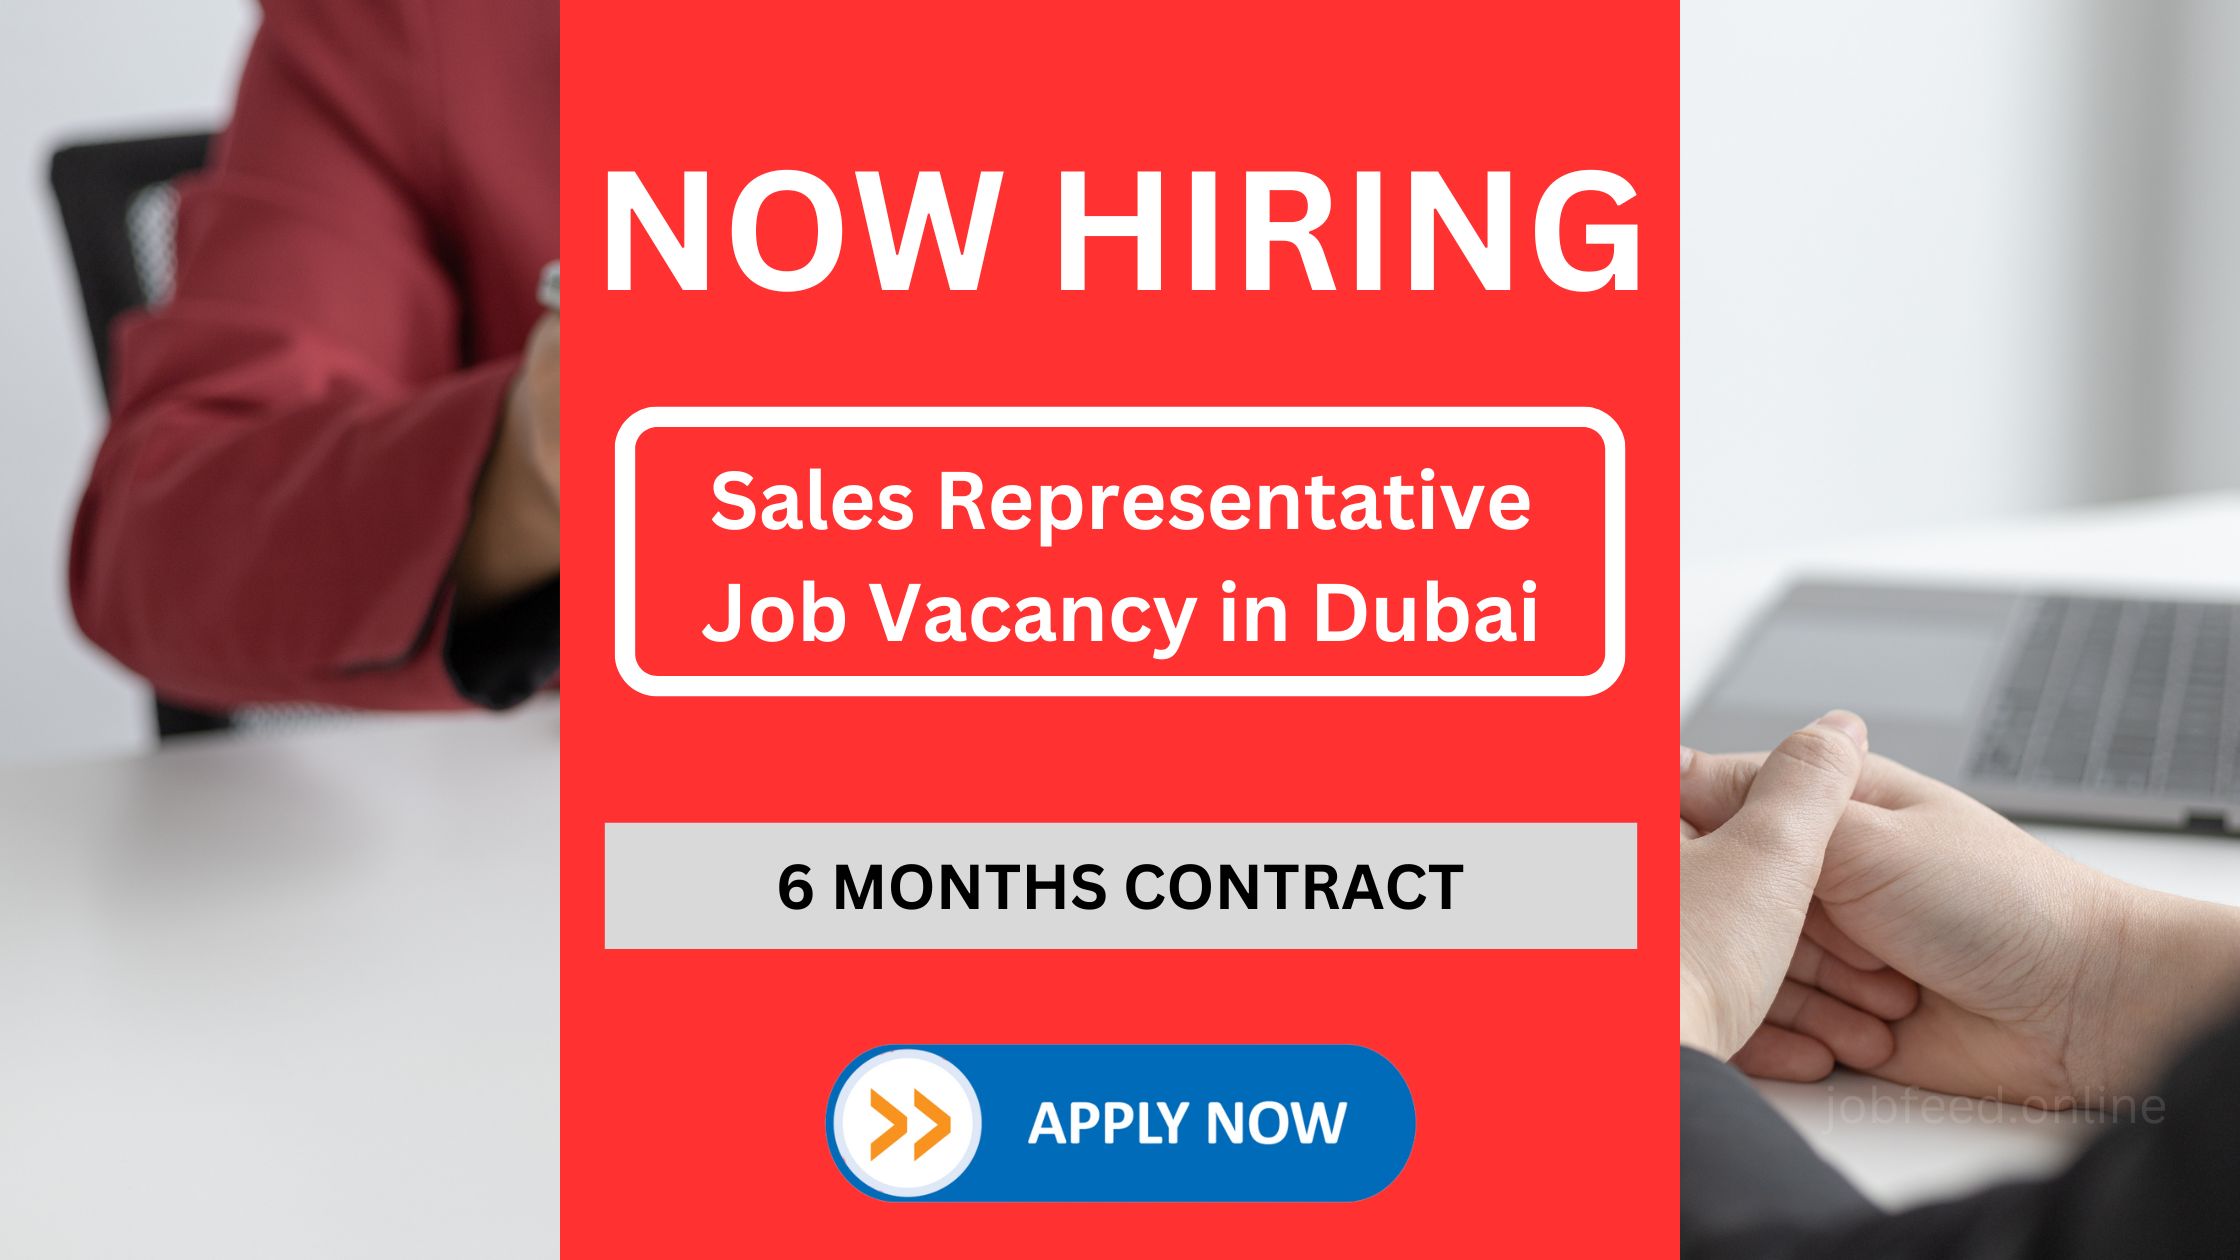 Jumeira Pest Control Service is Now Hiring for Sales Representative